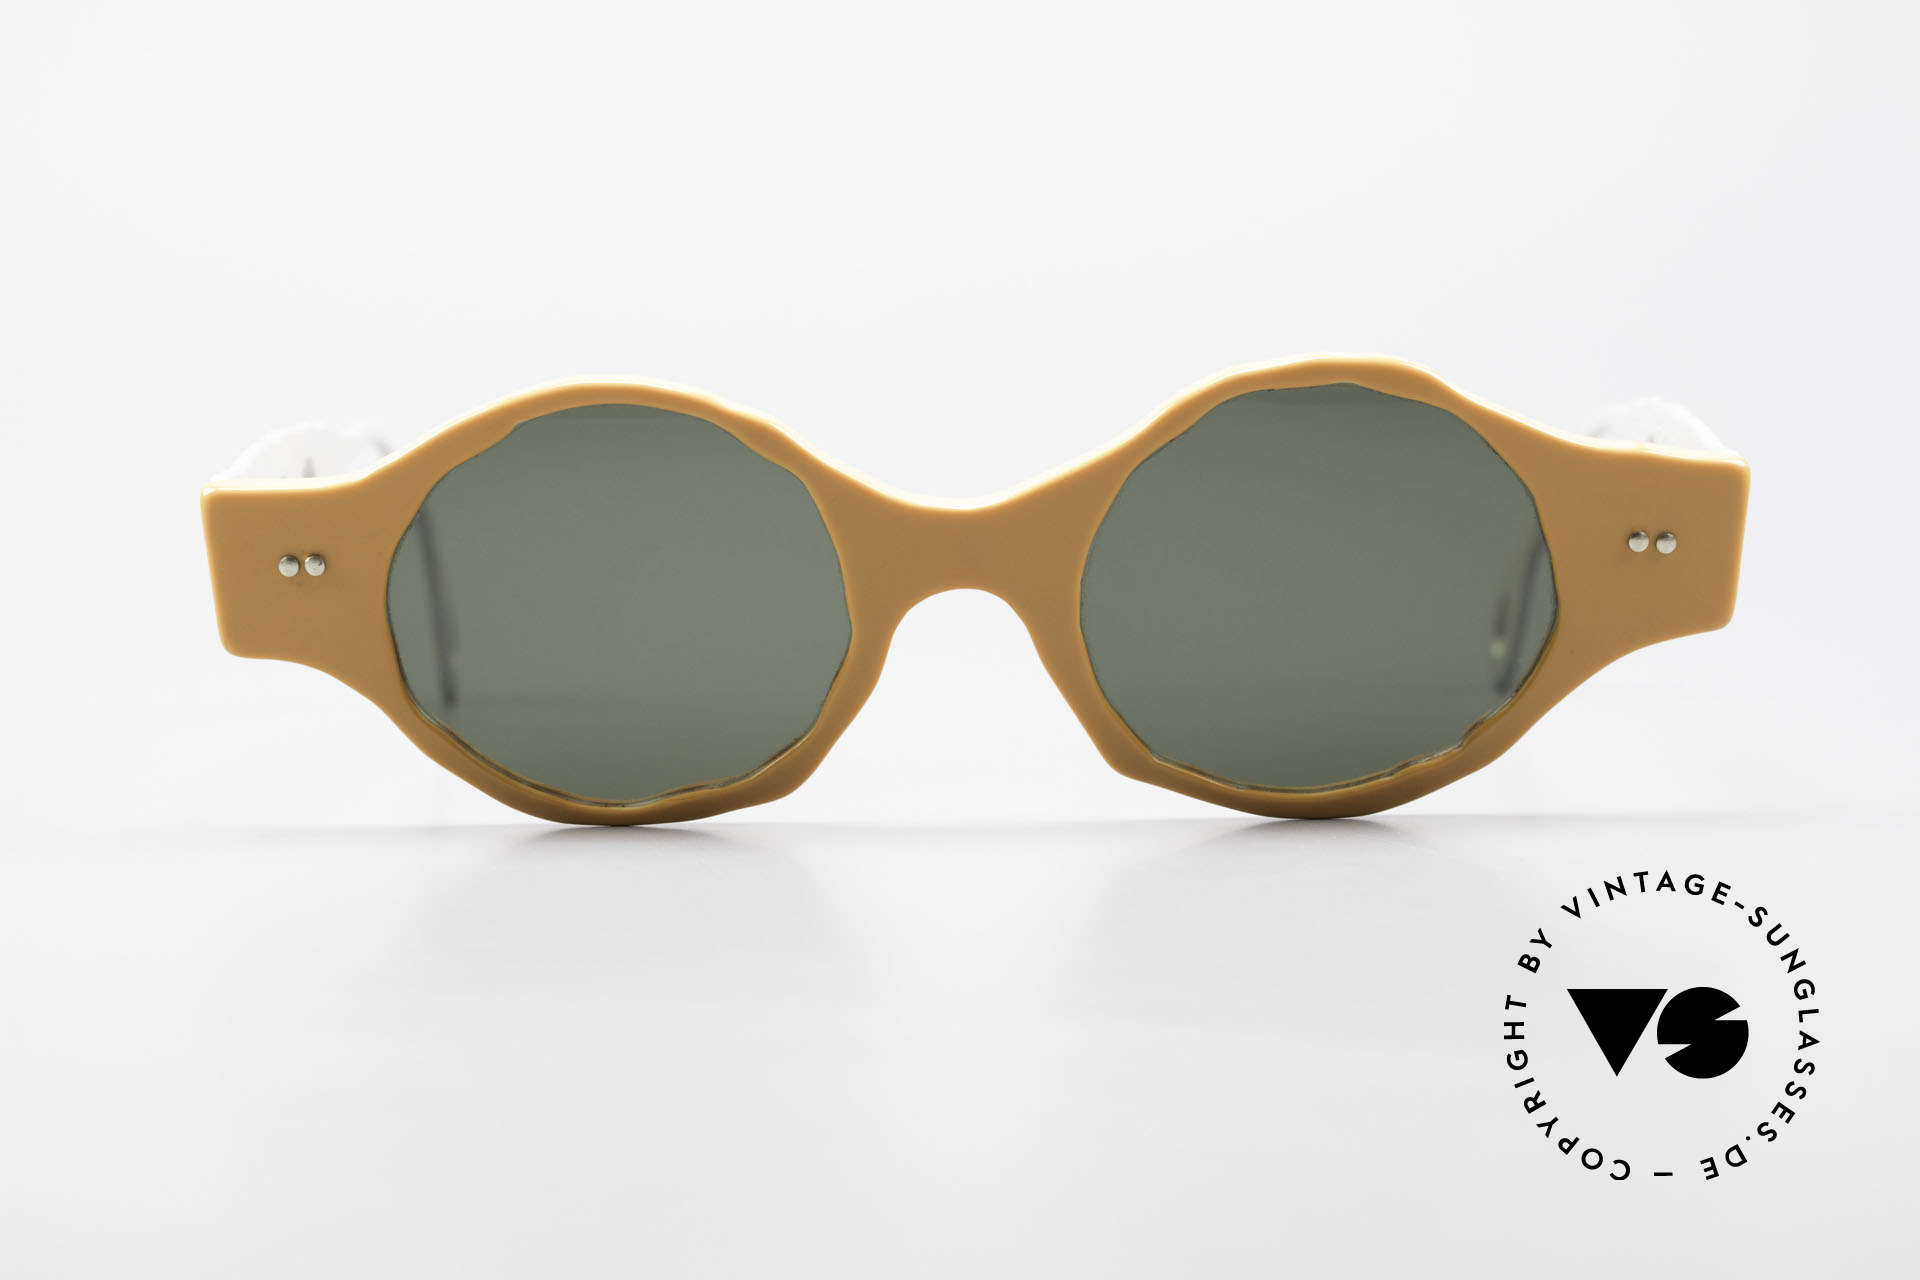 Theo Belgium Eye-Witness BK51 Avant-Garde Vintage Shades, founded in 1989 as 'opposite pole' to the 'mainstream', Made for Men and Women